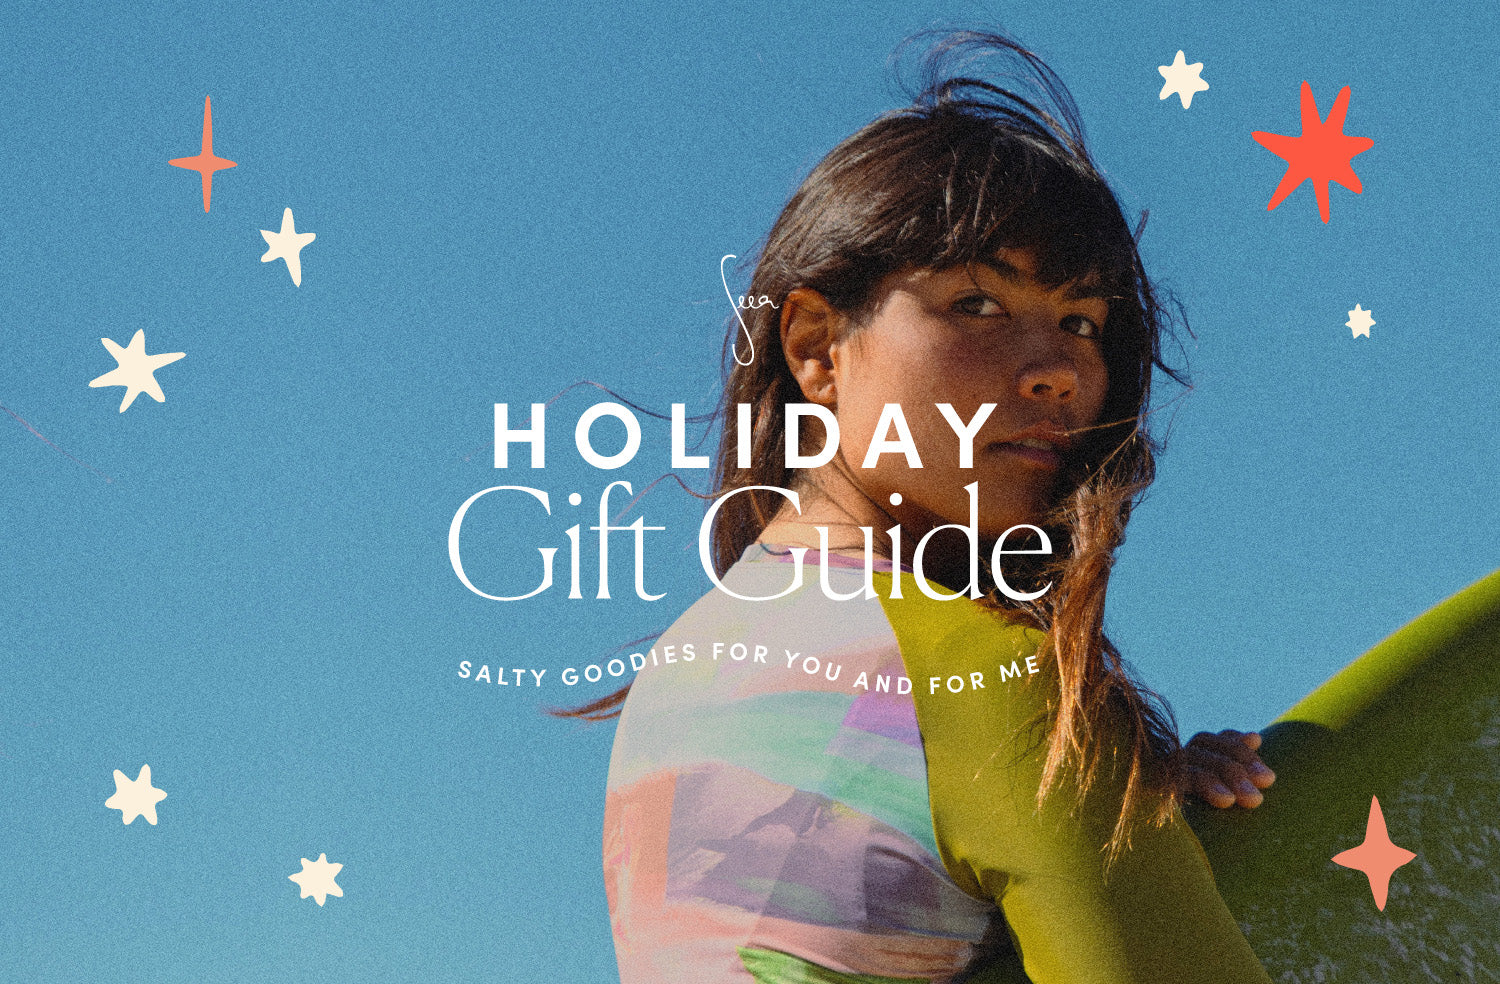 Seea Holiday Gift Guide for Surfers and water sports